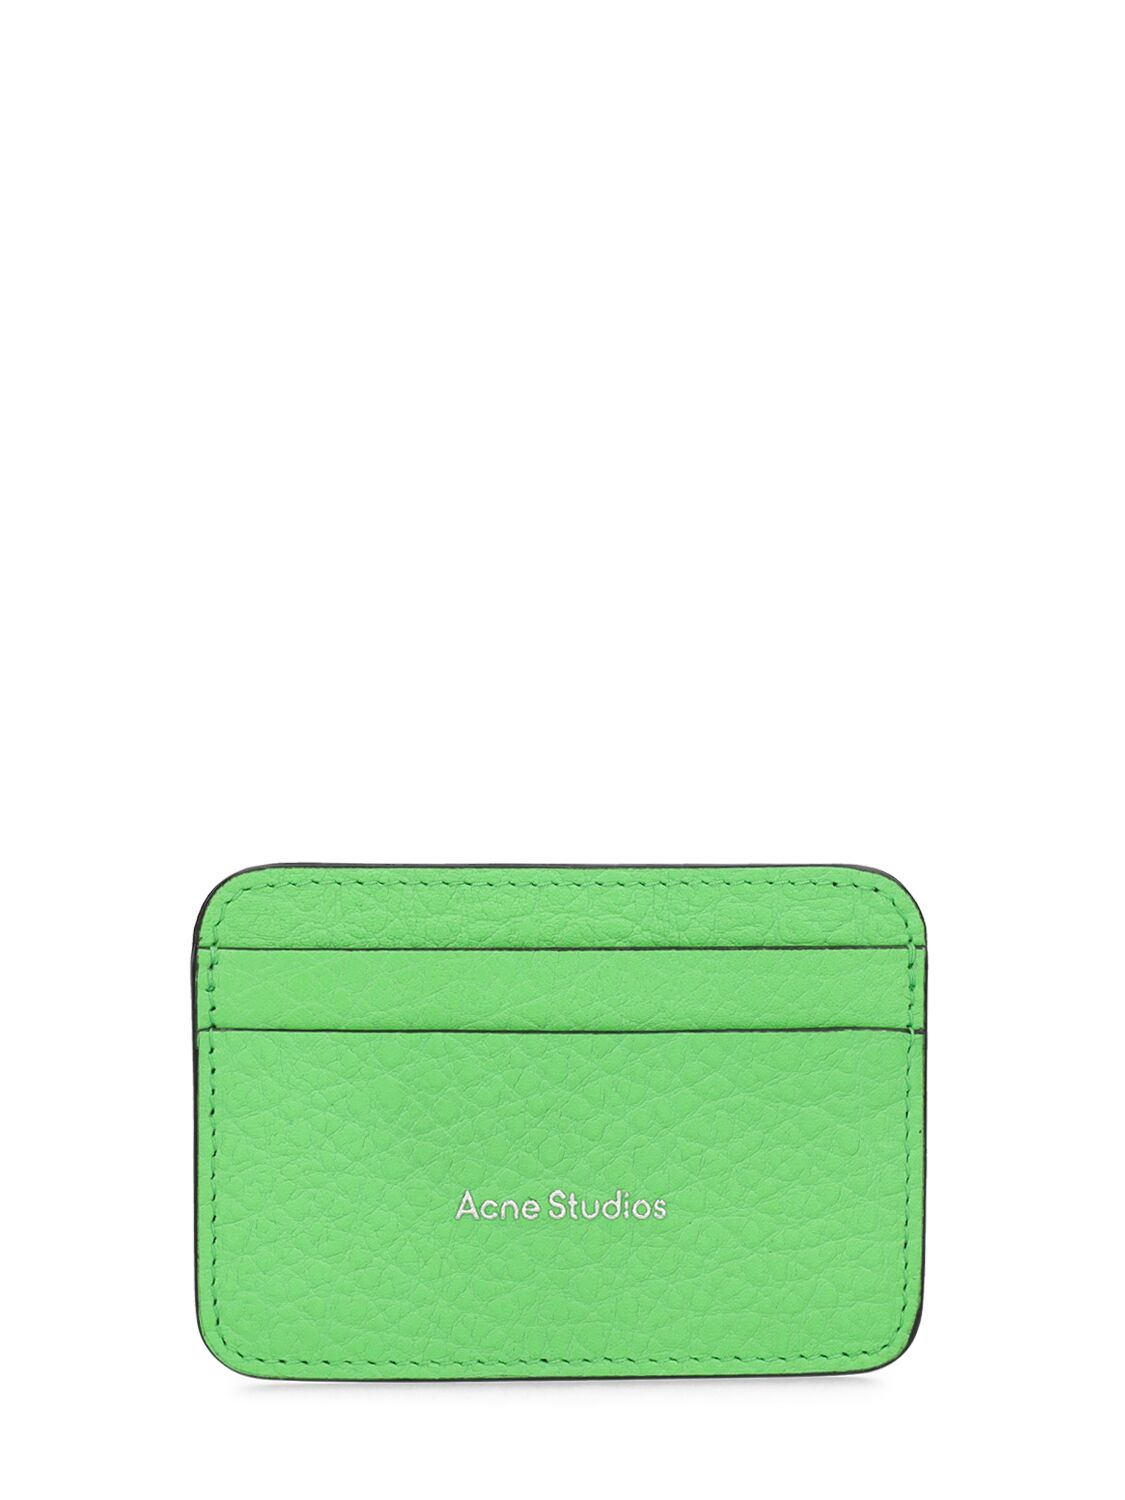 Acne Studios Embossed Signature Grained Leather Card Case In Green